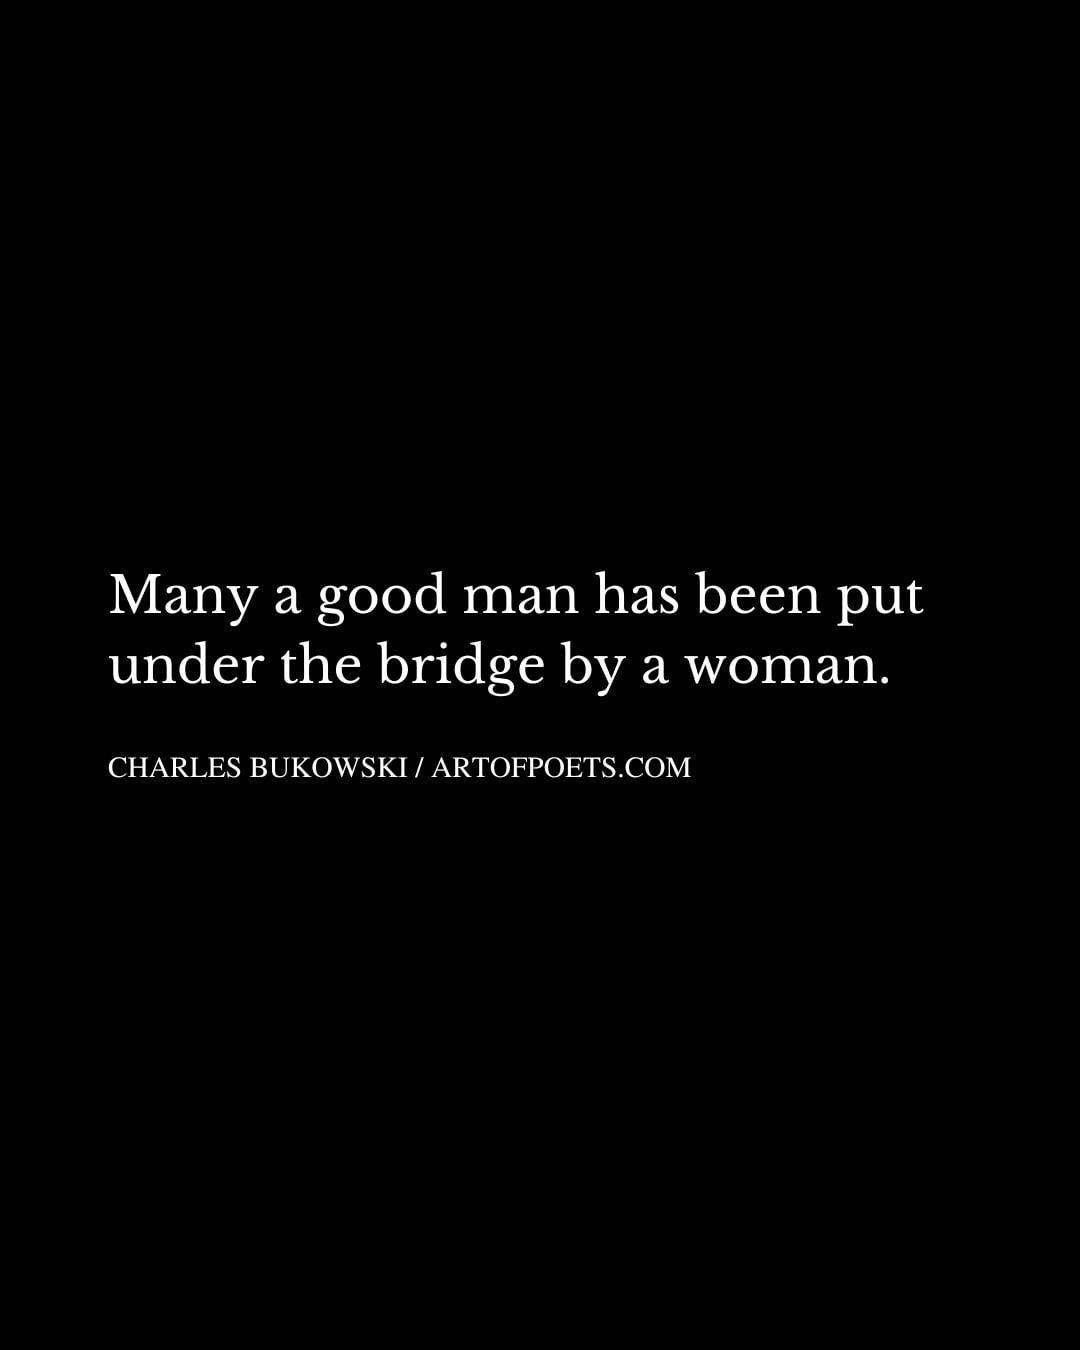 Many a good man has been put under the bridge by a woman